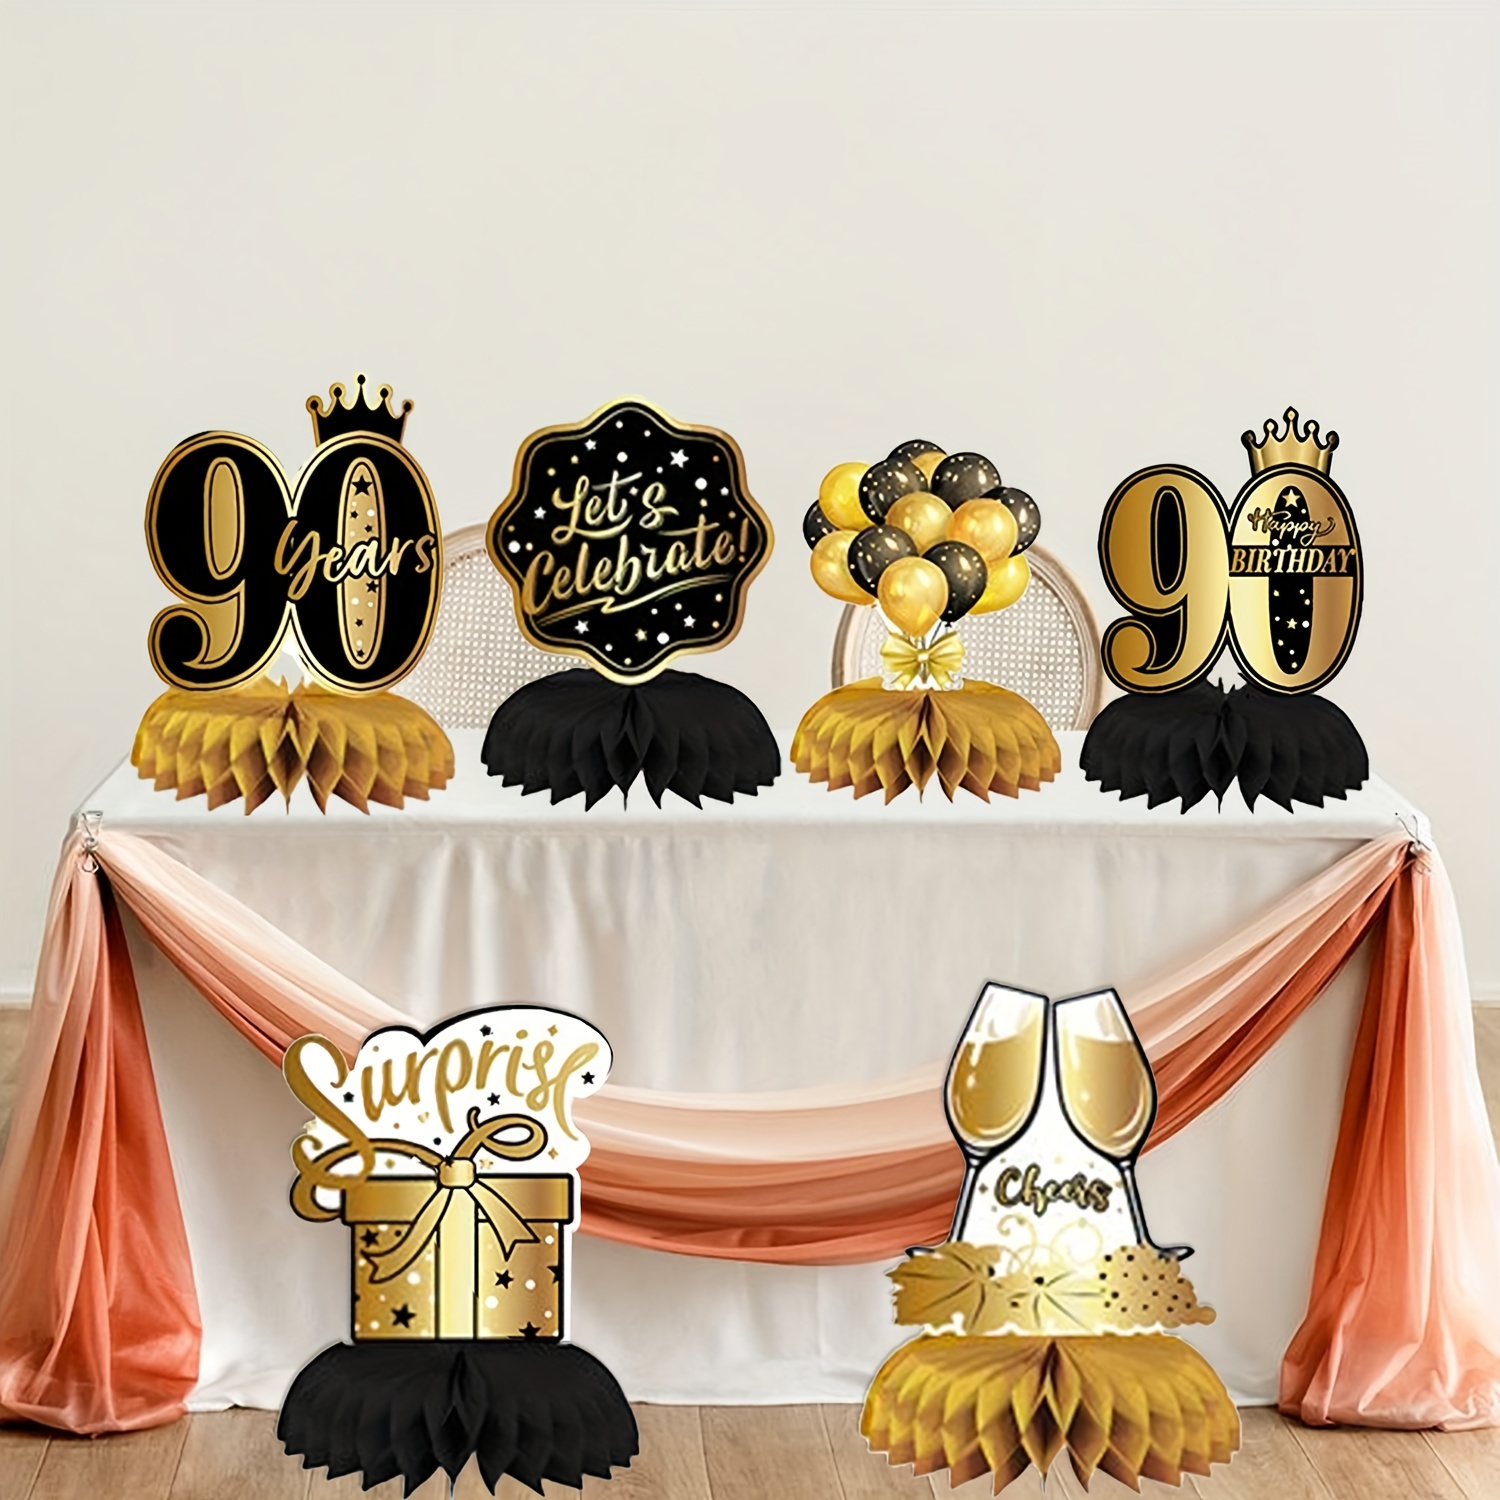 9 Pieces Black Gold Birthday Decorations Birthday Centerpieces for Tables  Dec